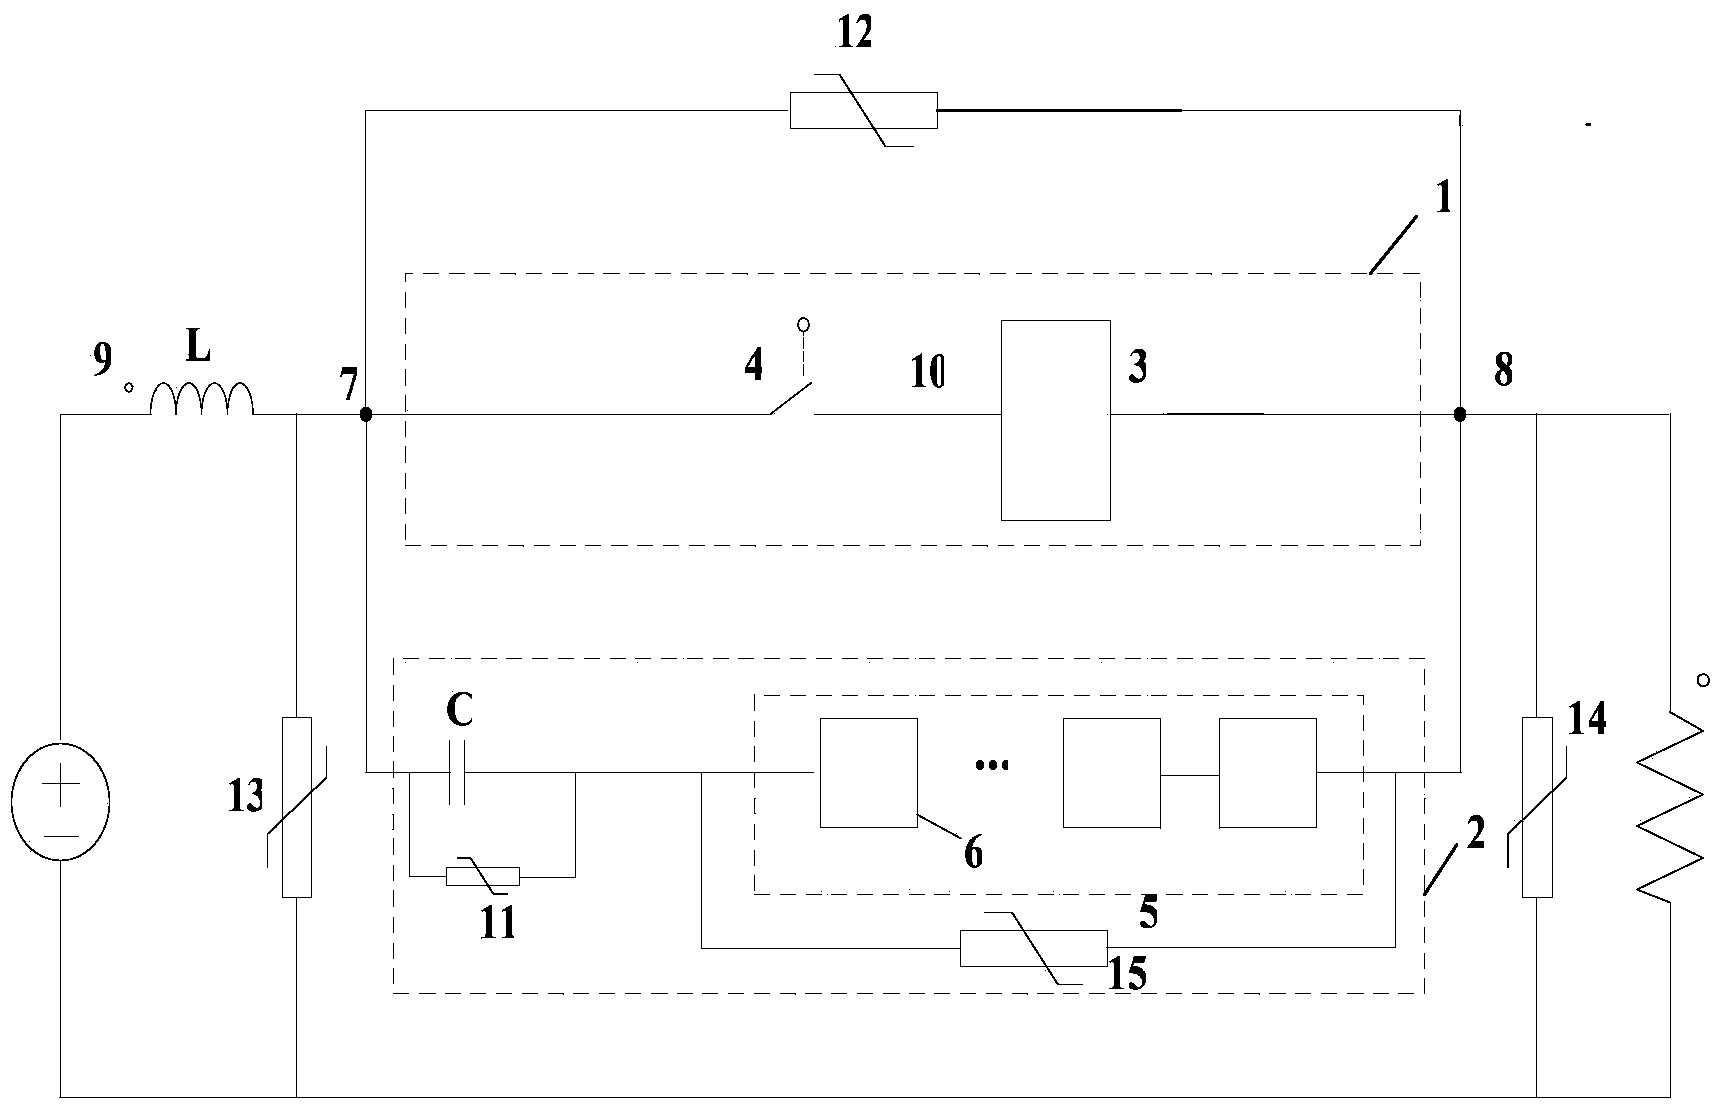 High-voltage direct-current breaker topology